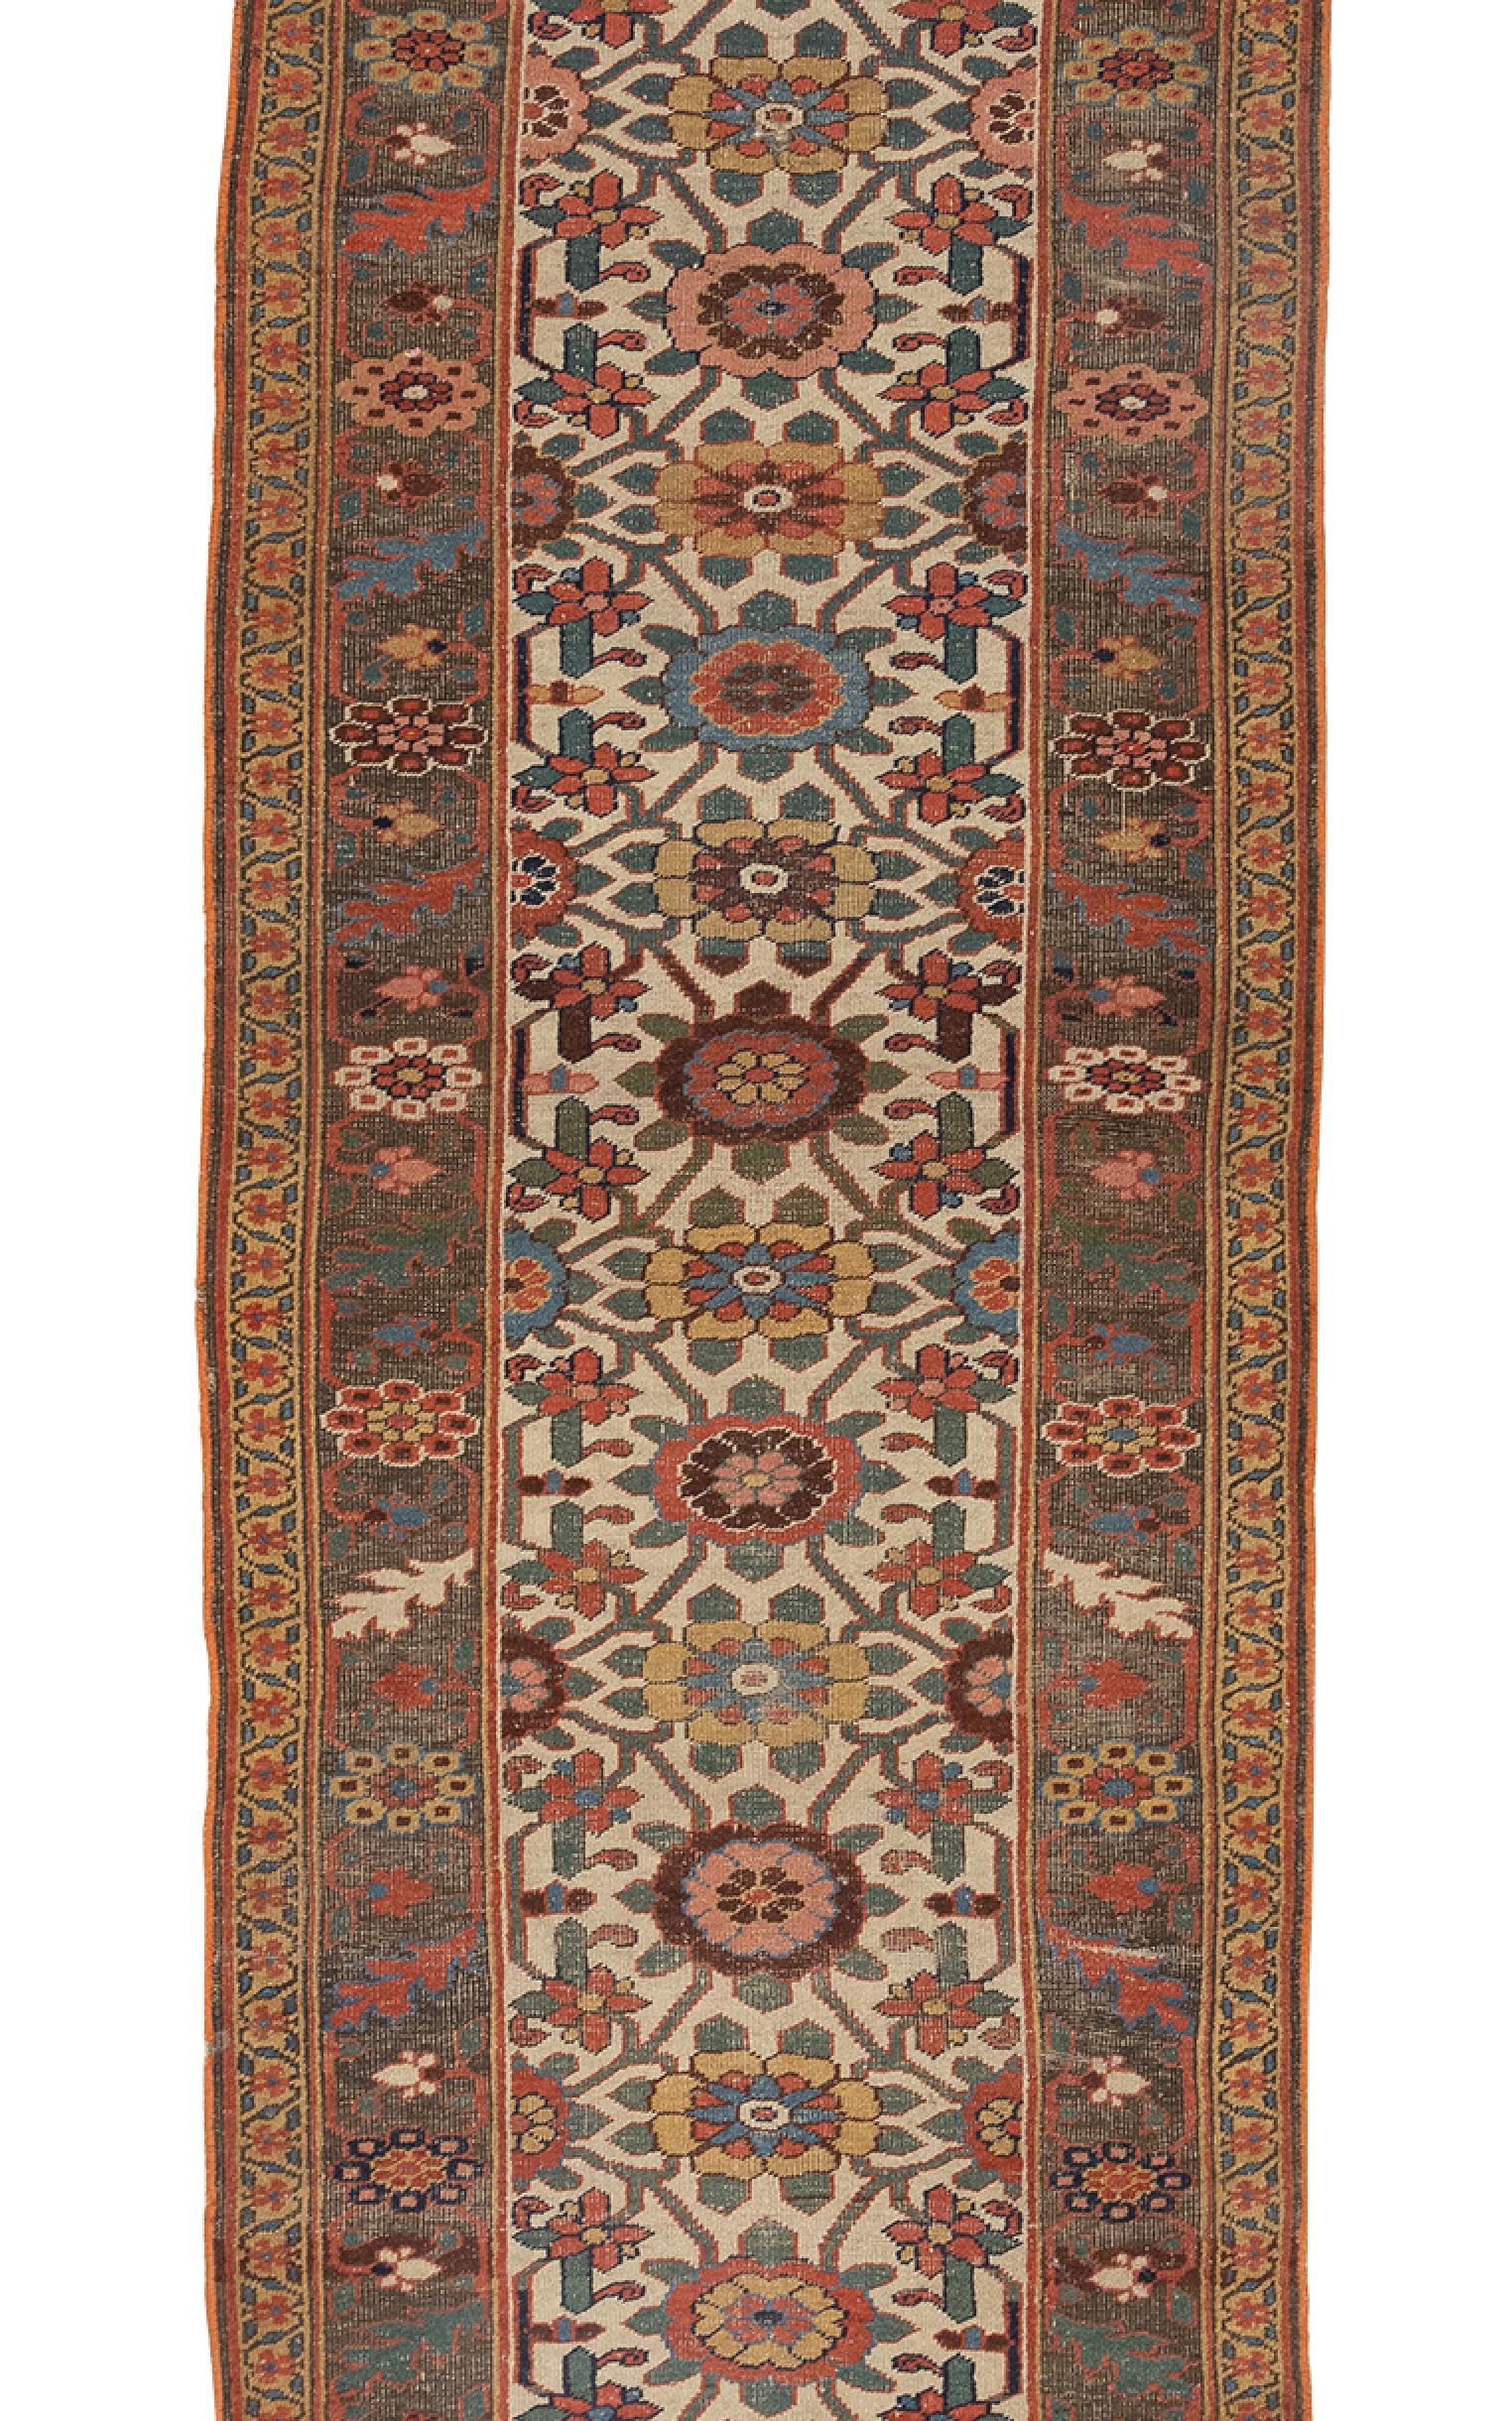 This antique Bijar runner circa 1880s is truly an exceptional piece with a vivid color scheme. It features ornately stylized floral patterns woven in rich vibrant greens, saffron’s, blues, navy, browns, red against a clean ivory field. It is framed